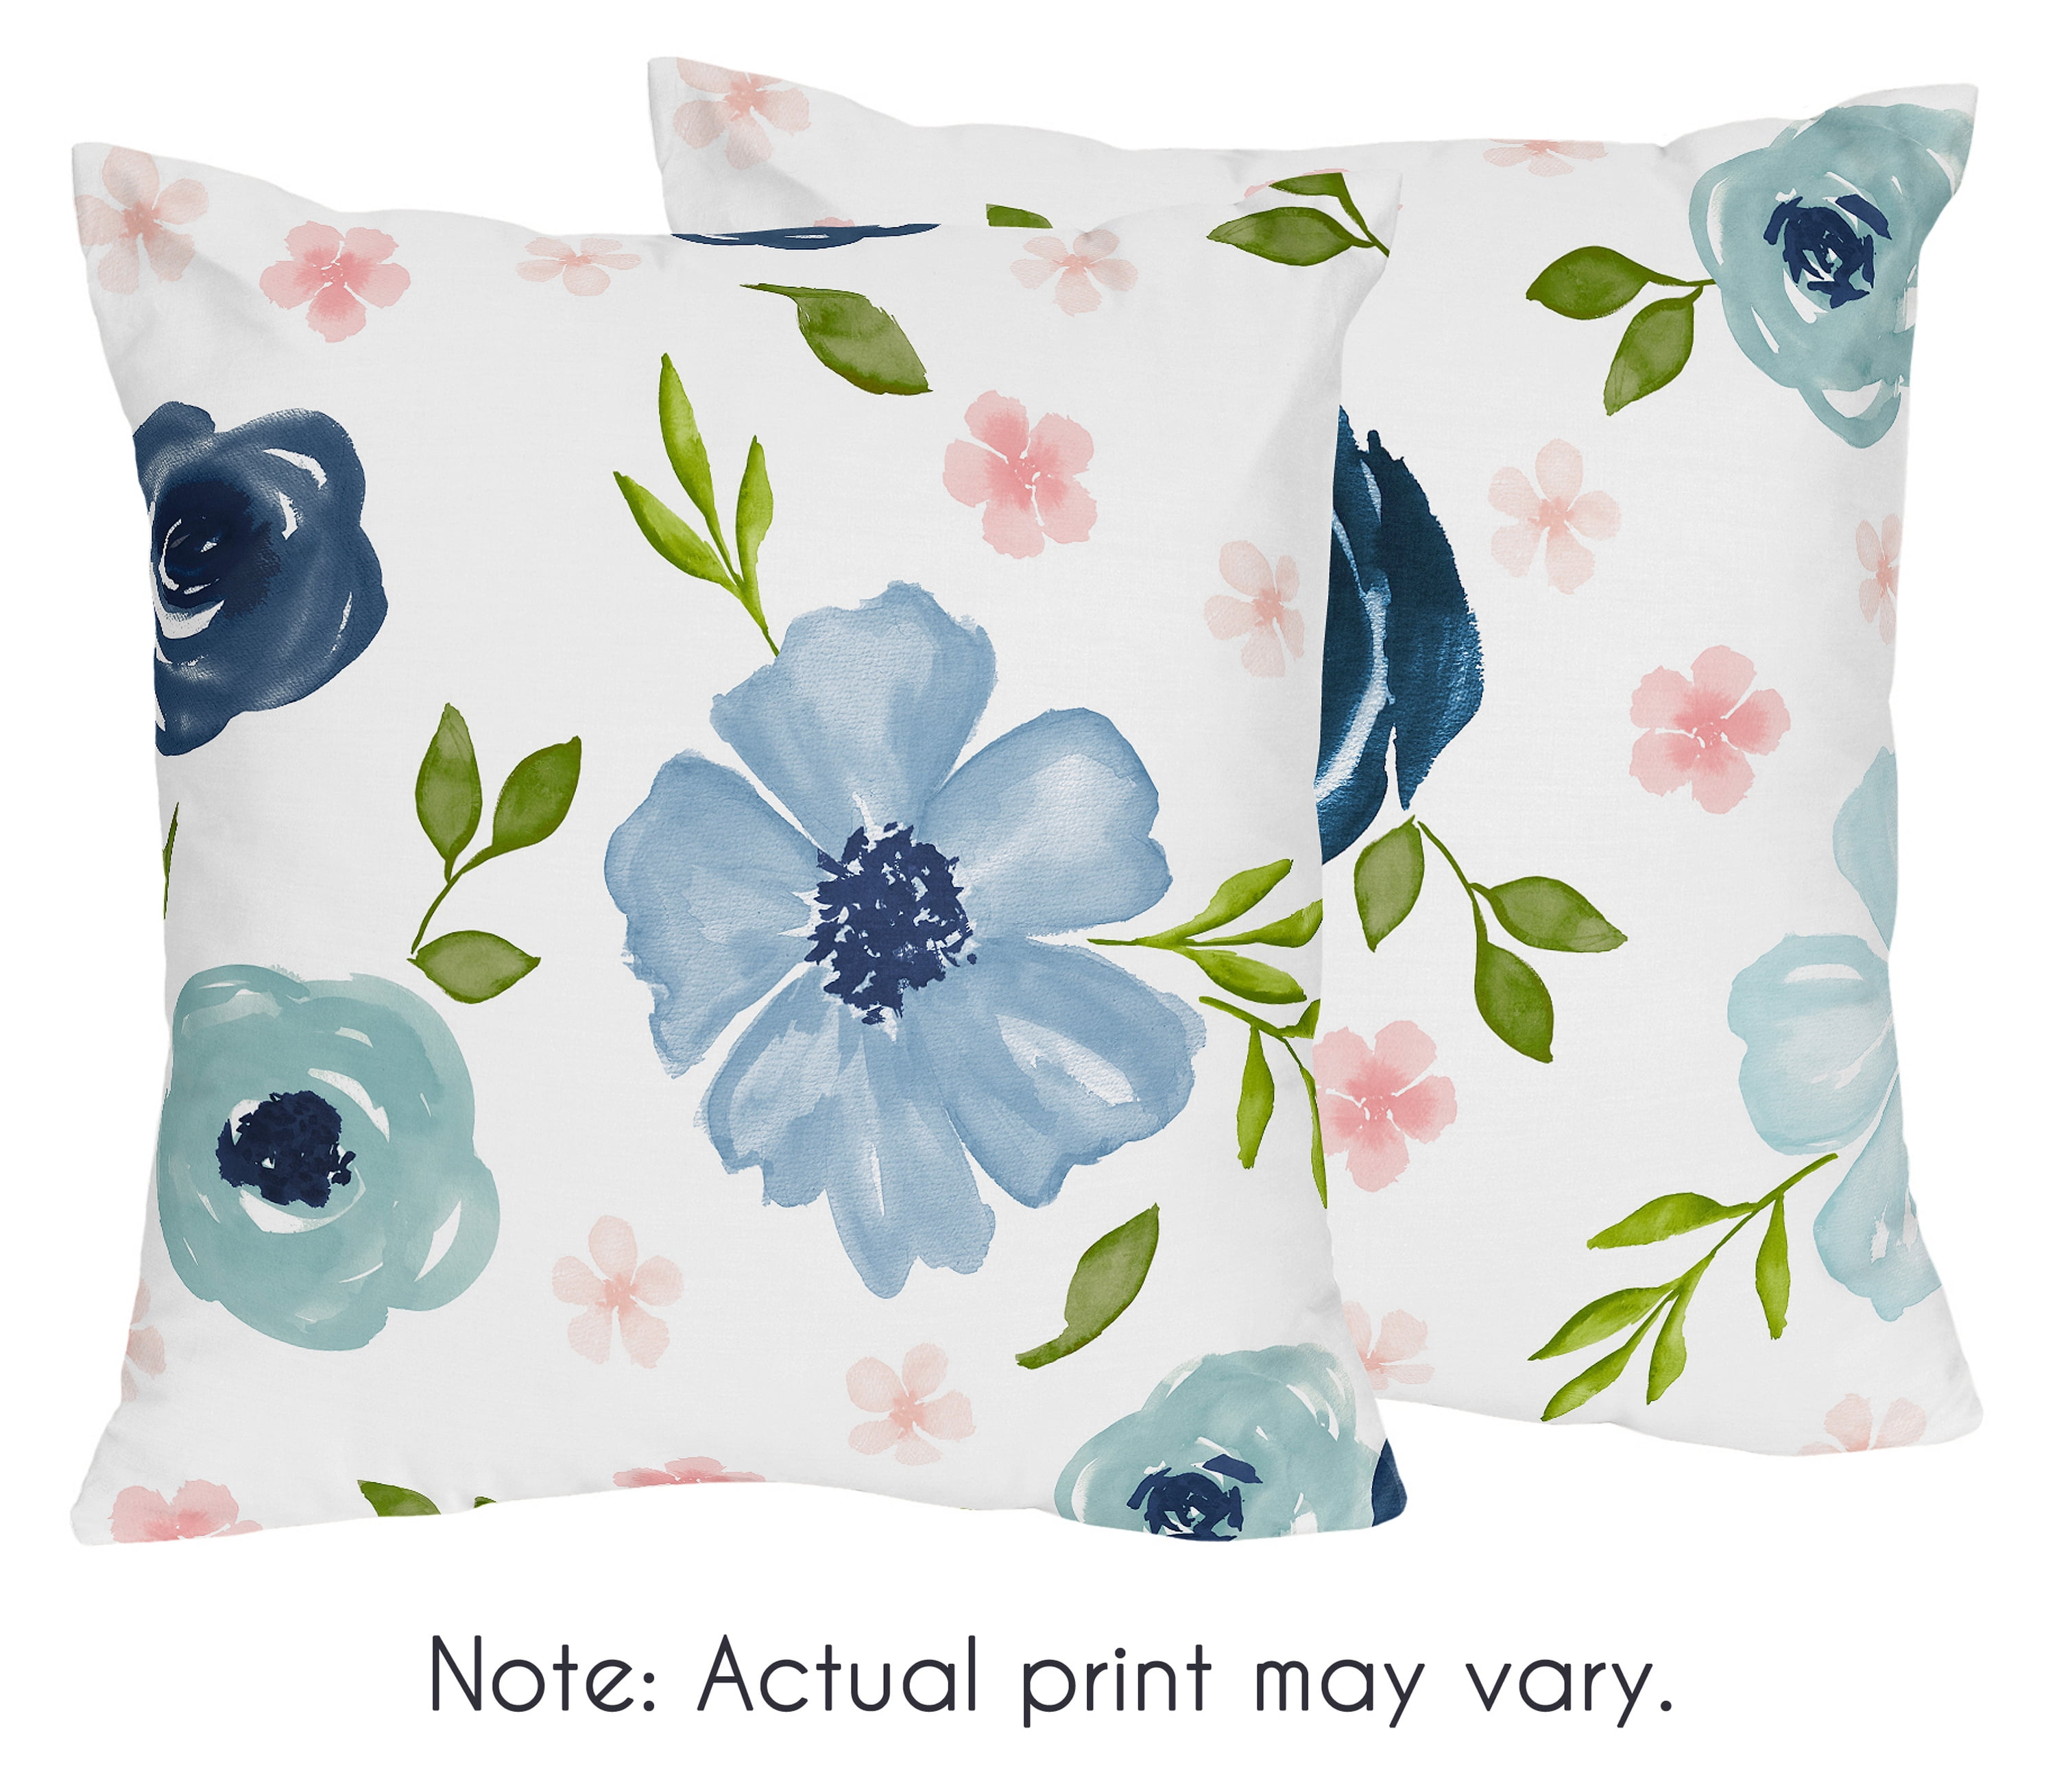 Lav et navn Misbrug puls Blue and Pink Floral Accent Pillows - Set of 2 - Blush, Navy, Green and  White Shabby Chic Watercolor Rose Flower Decorative Throw by Sweet Jojo  Designs - Walmart.com